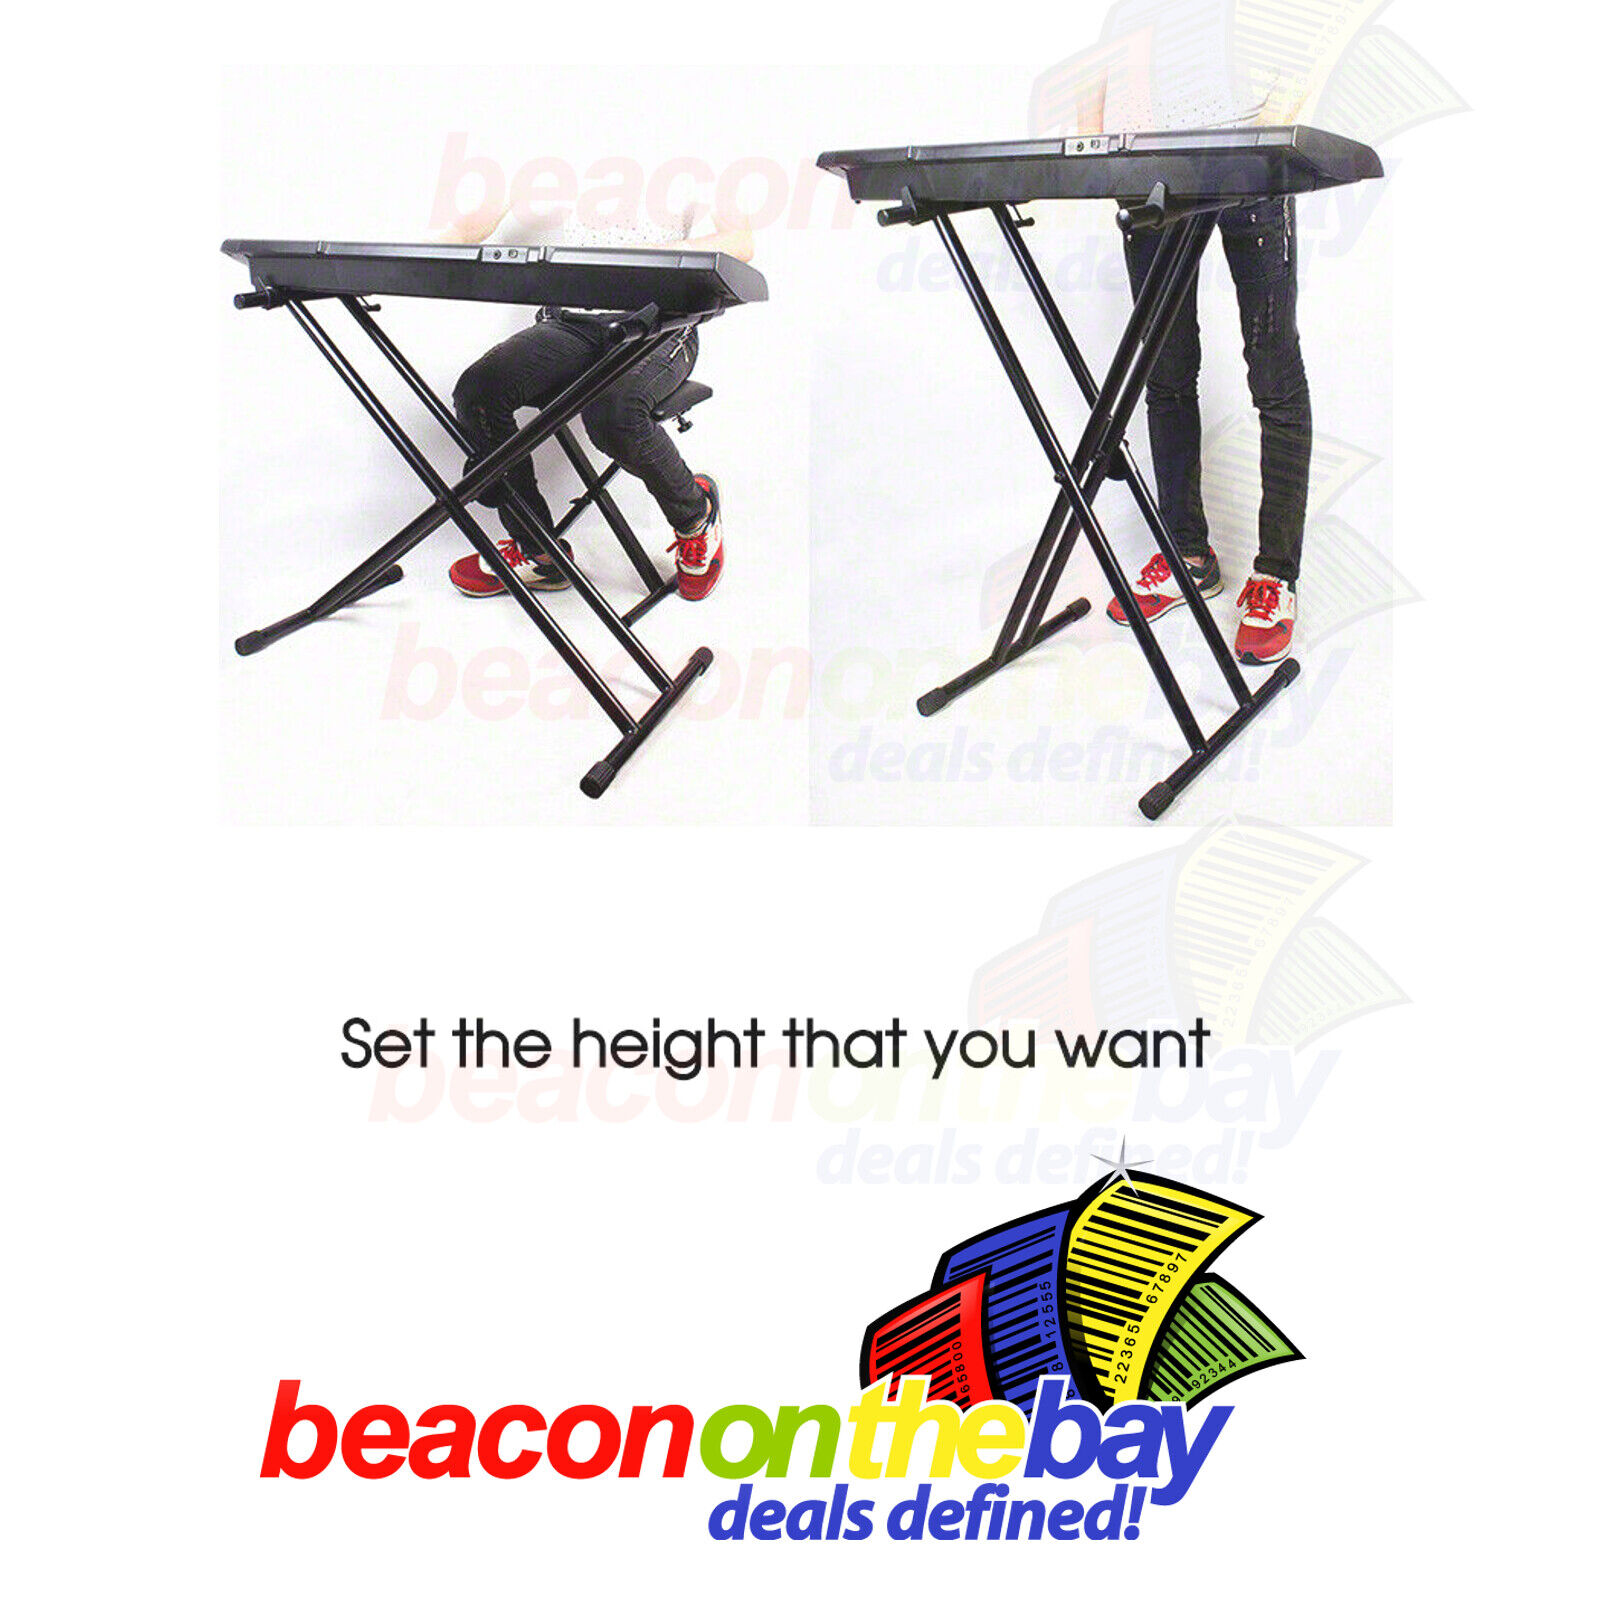 Adjustable Keyboard Stand Piano Stool Set Seat Folding Bench Chair Portable Seat Ashtec Does Not Apply - фотография #2